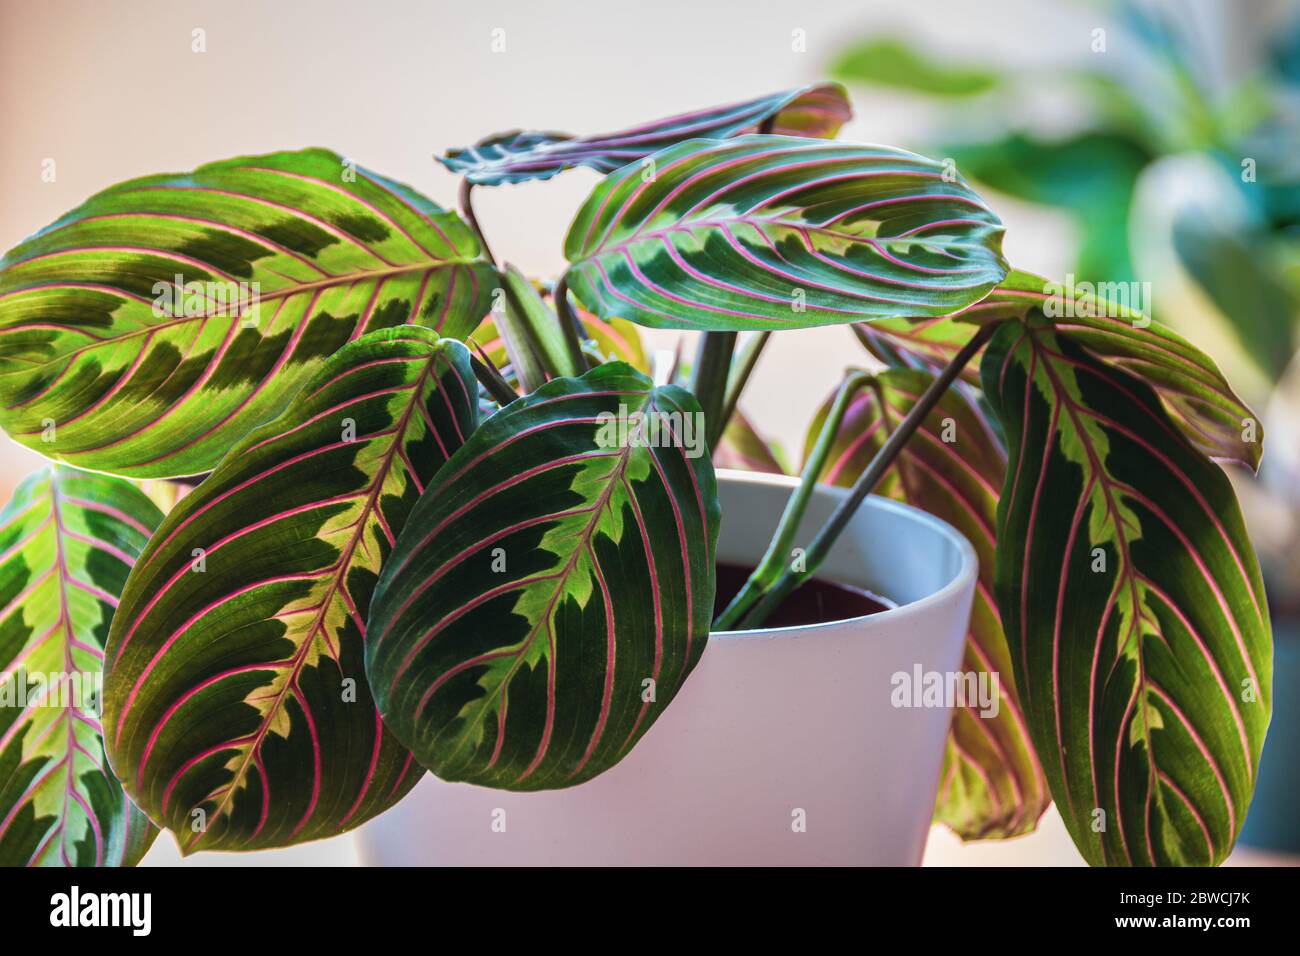 Close Up On A Prayer Plant Maranta Leuconeura Var Erythroneura In White Pot In A Sunny Urban Apartment With Other Plants In The Background Stock Photo Alamy